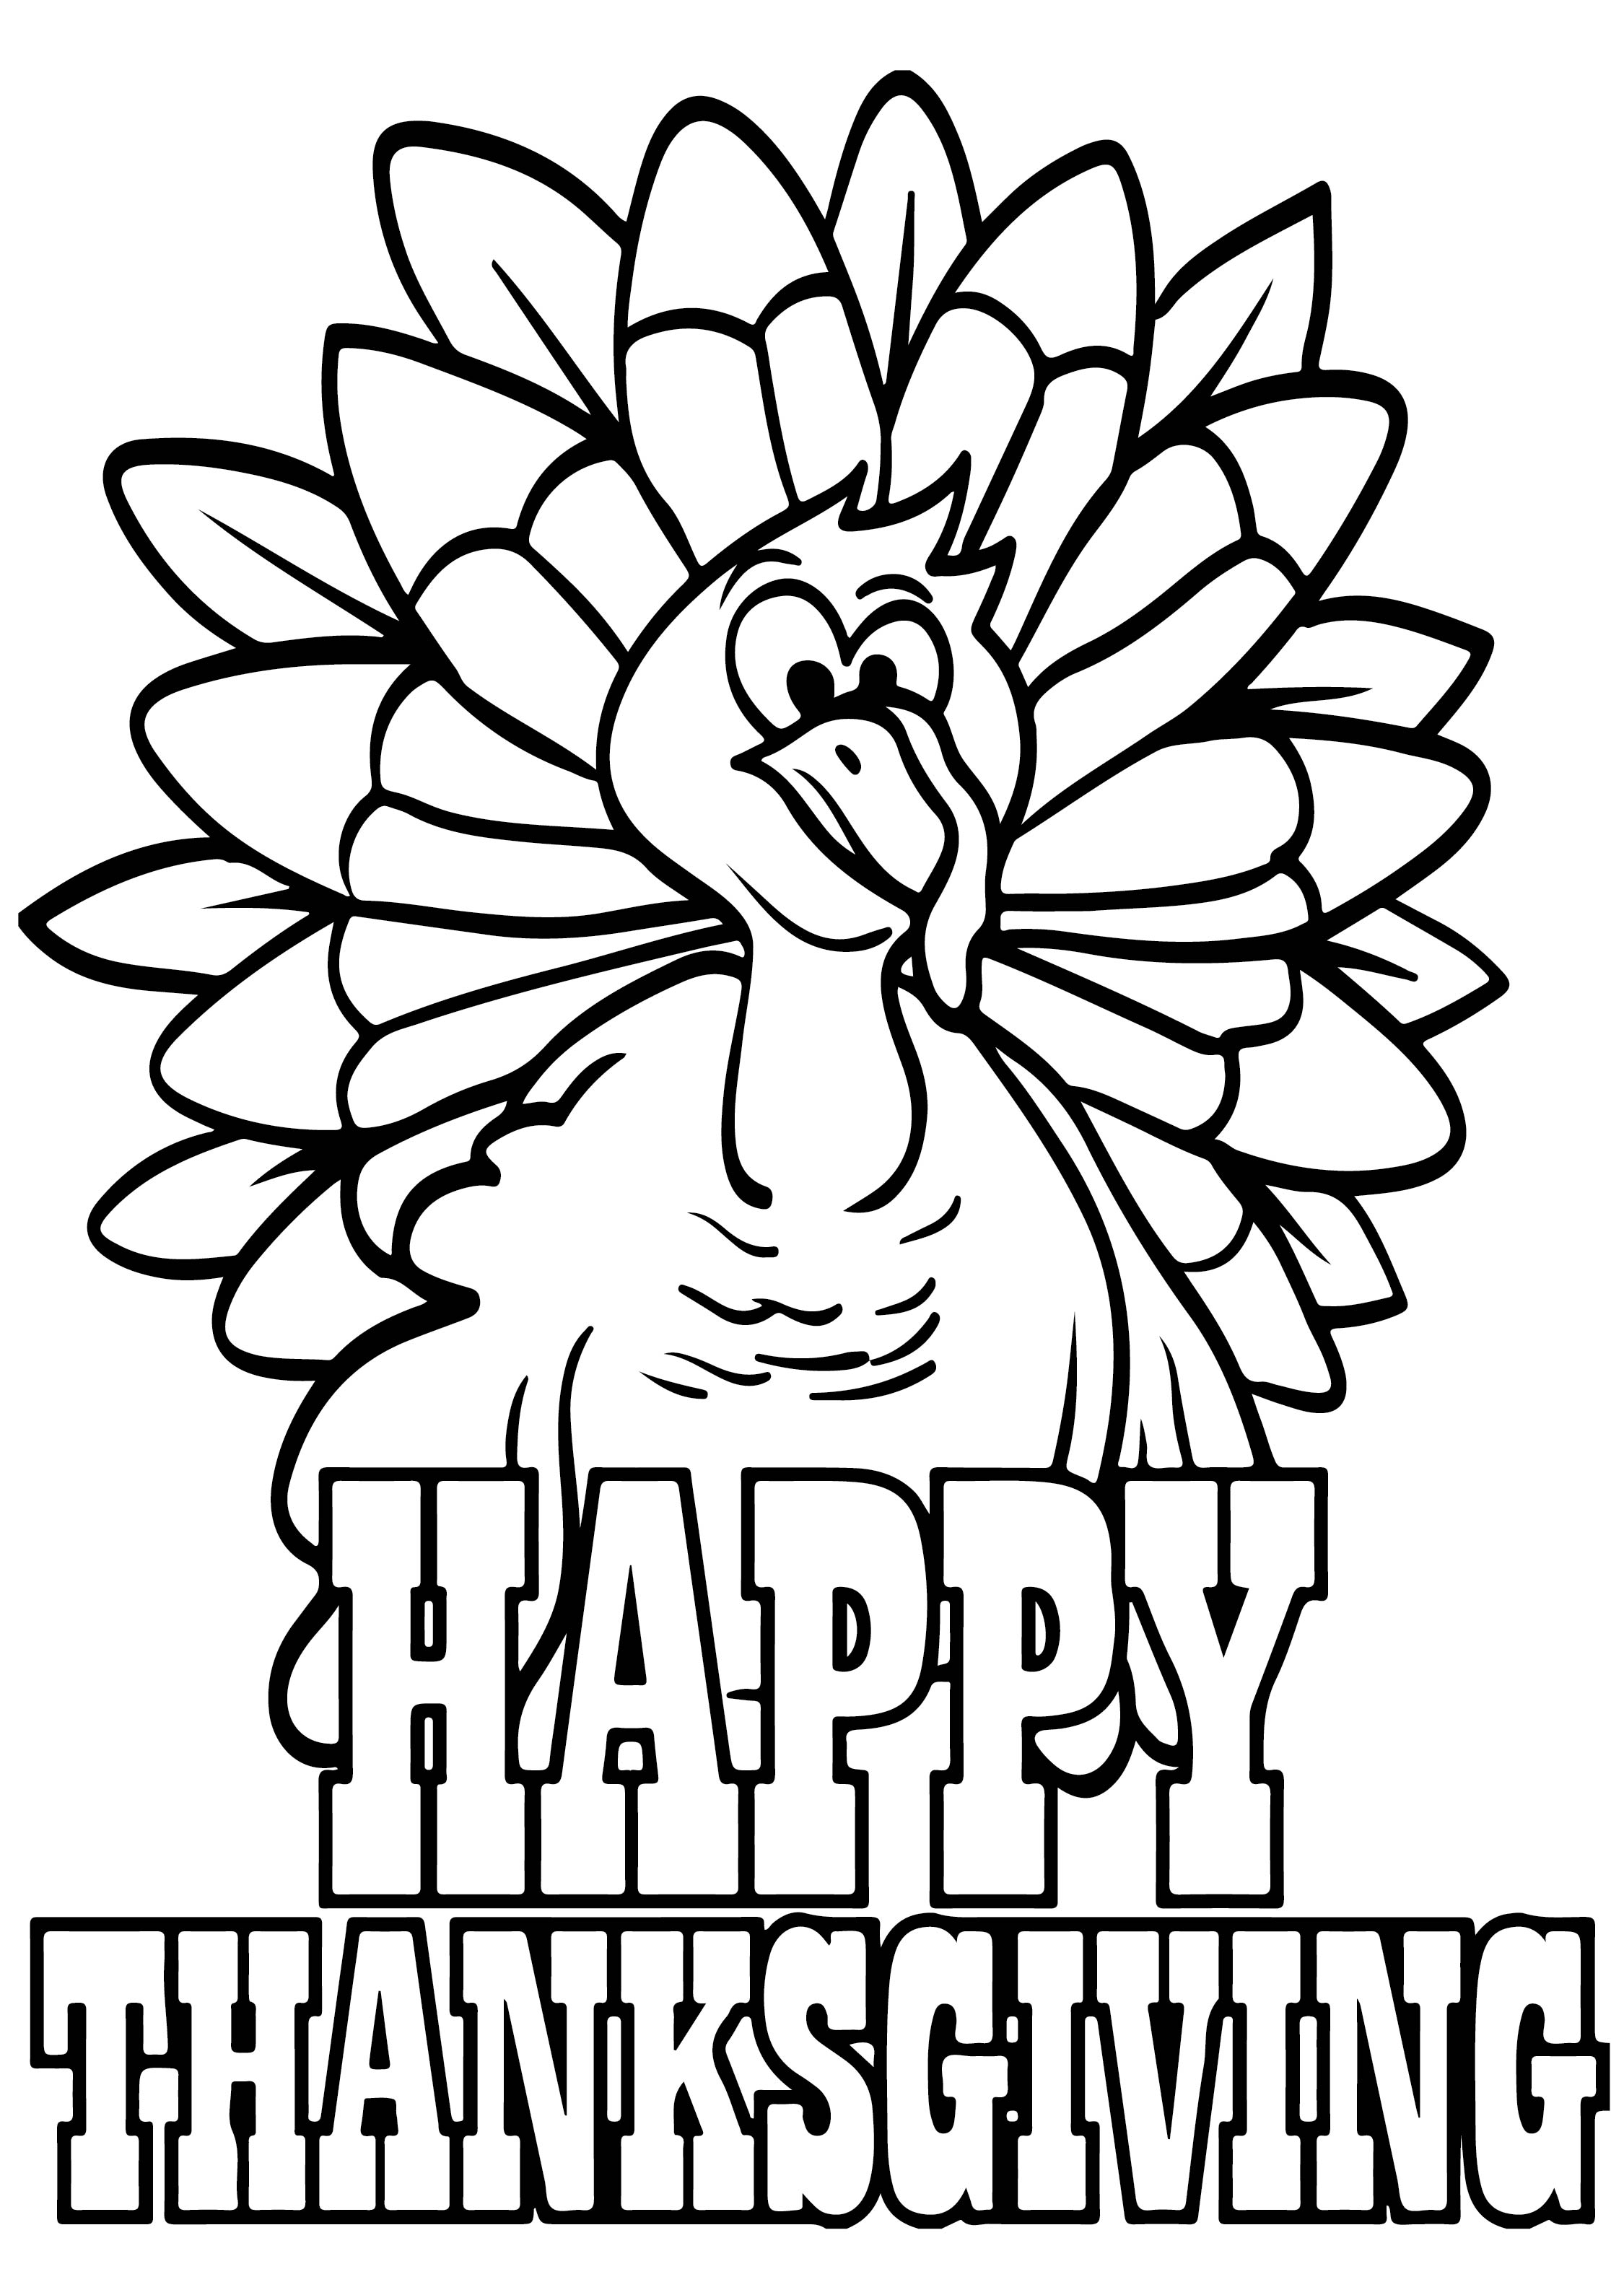 Printable Coloring Sheets For Thanksgiving Free Printable Templates